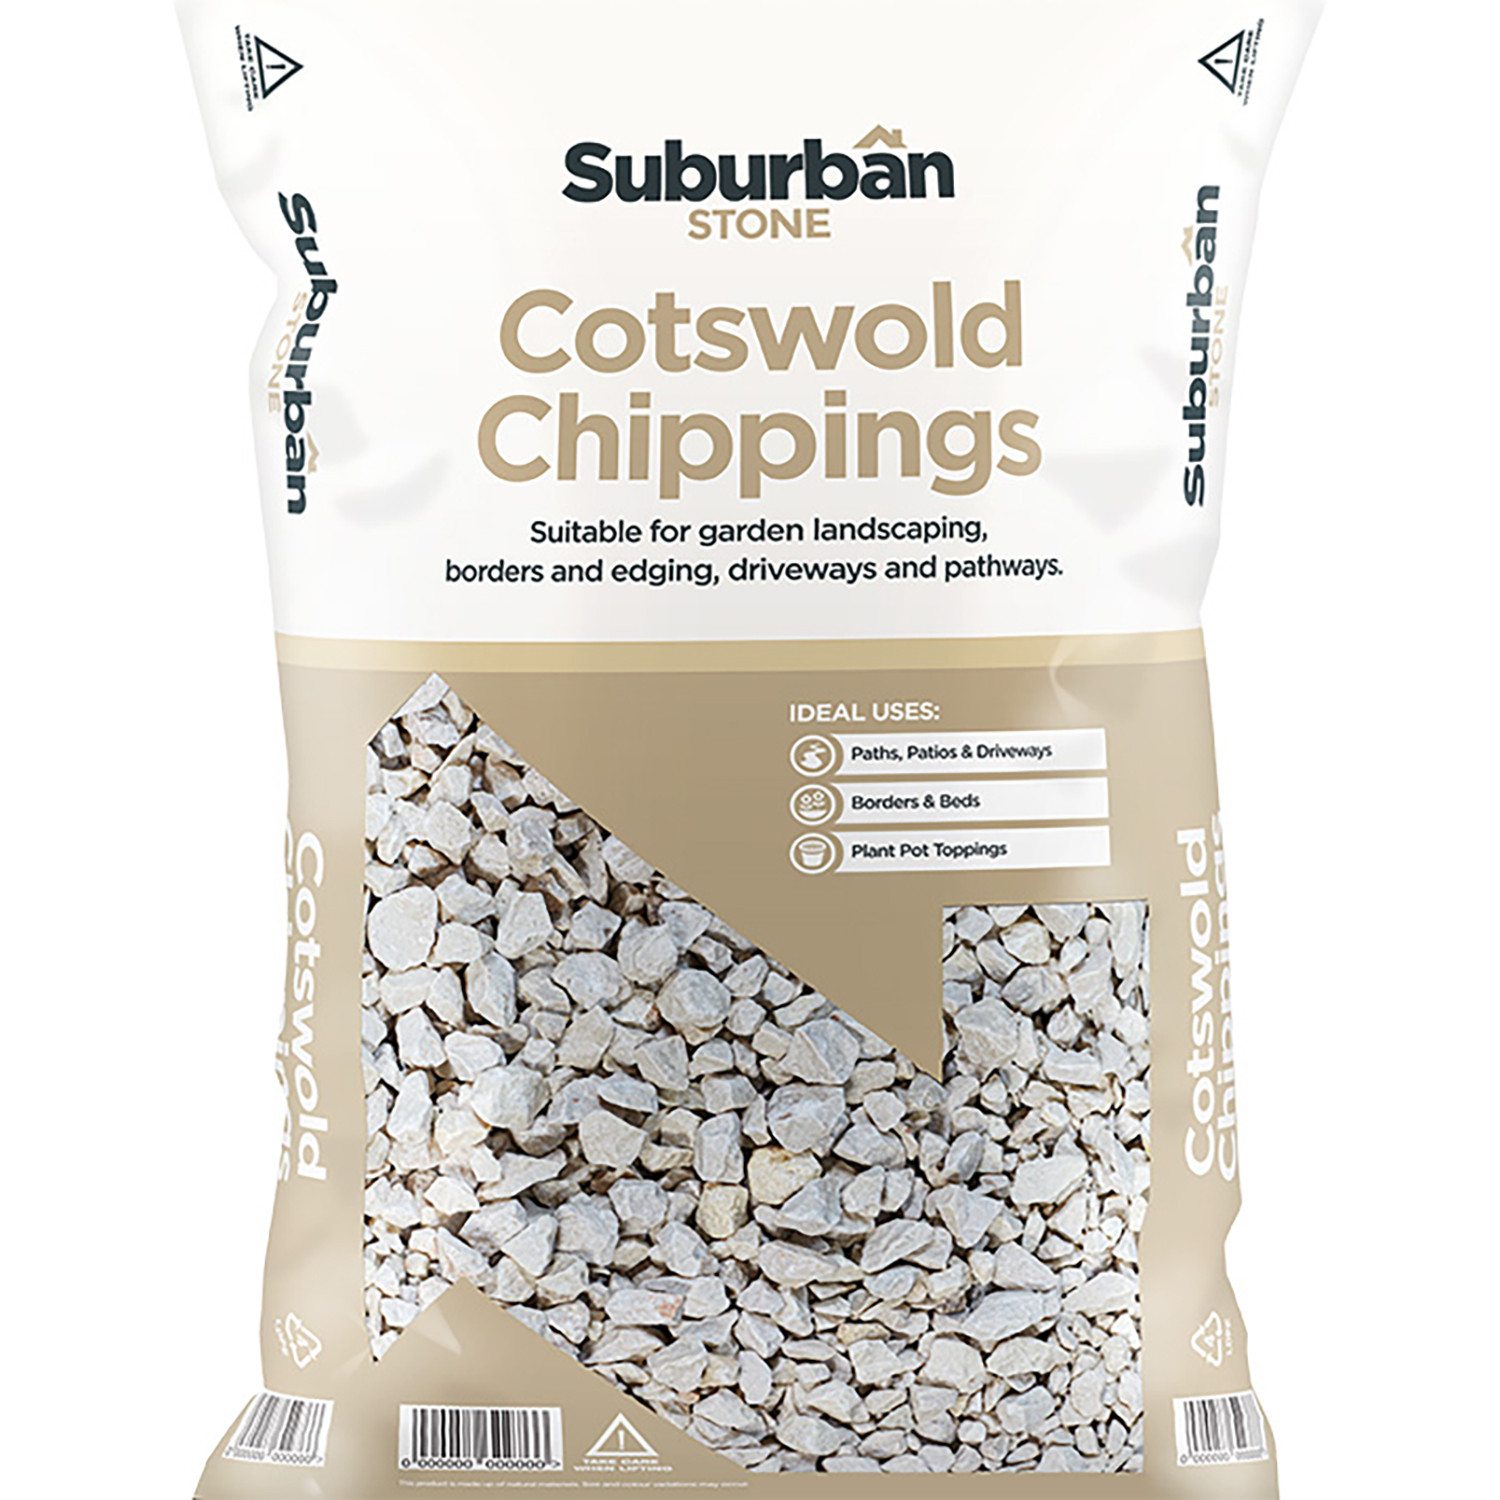 Suburban Stone Cotswold Chippings 20kg Image